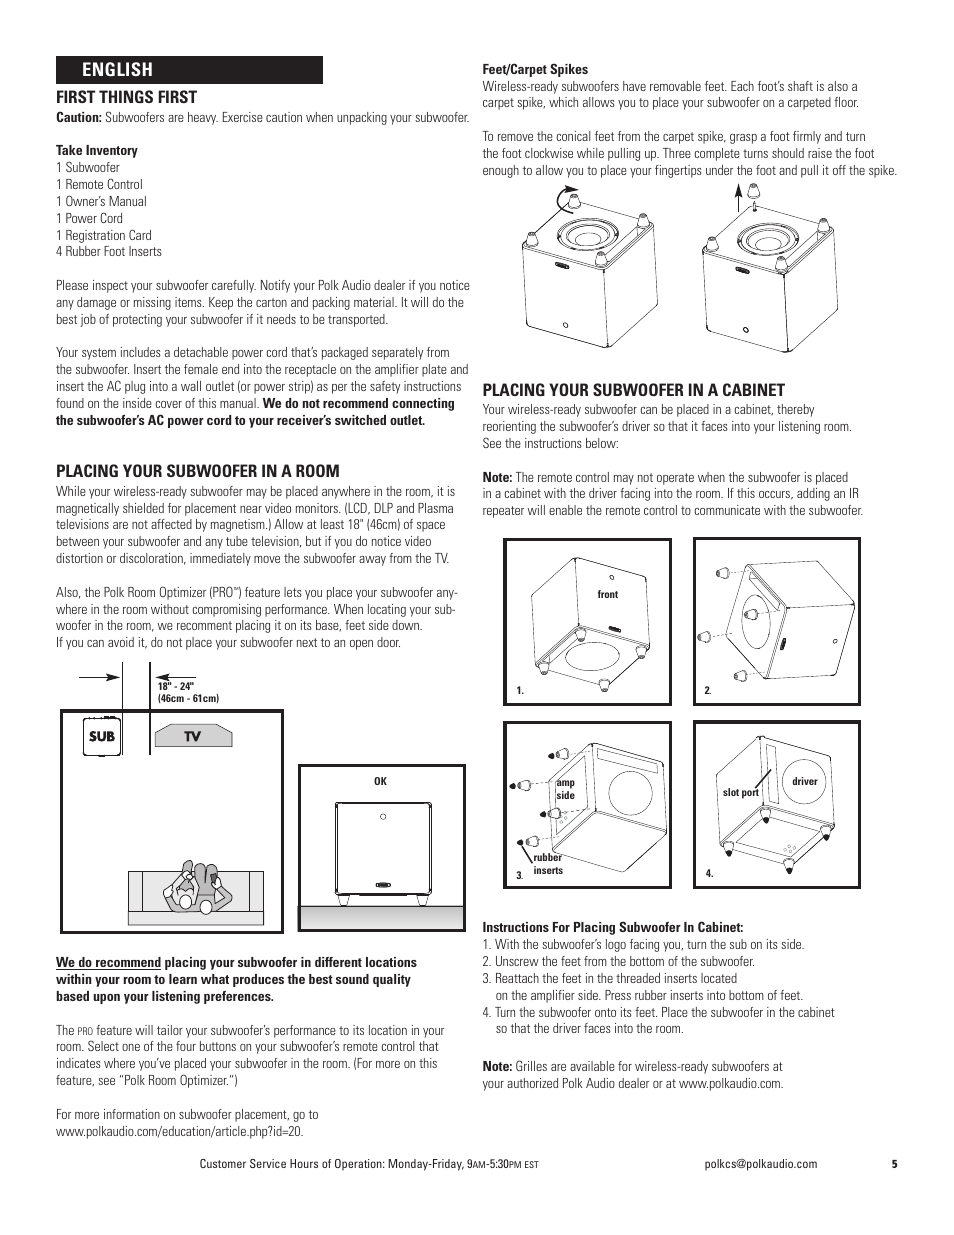 English, First things first, Placing your subwoofer in a room | Polk Audio  DSW PRO 440wi User Manual | Page 5 / 60 | Original mode